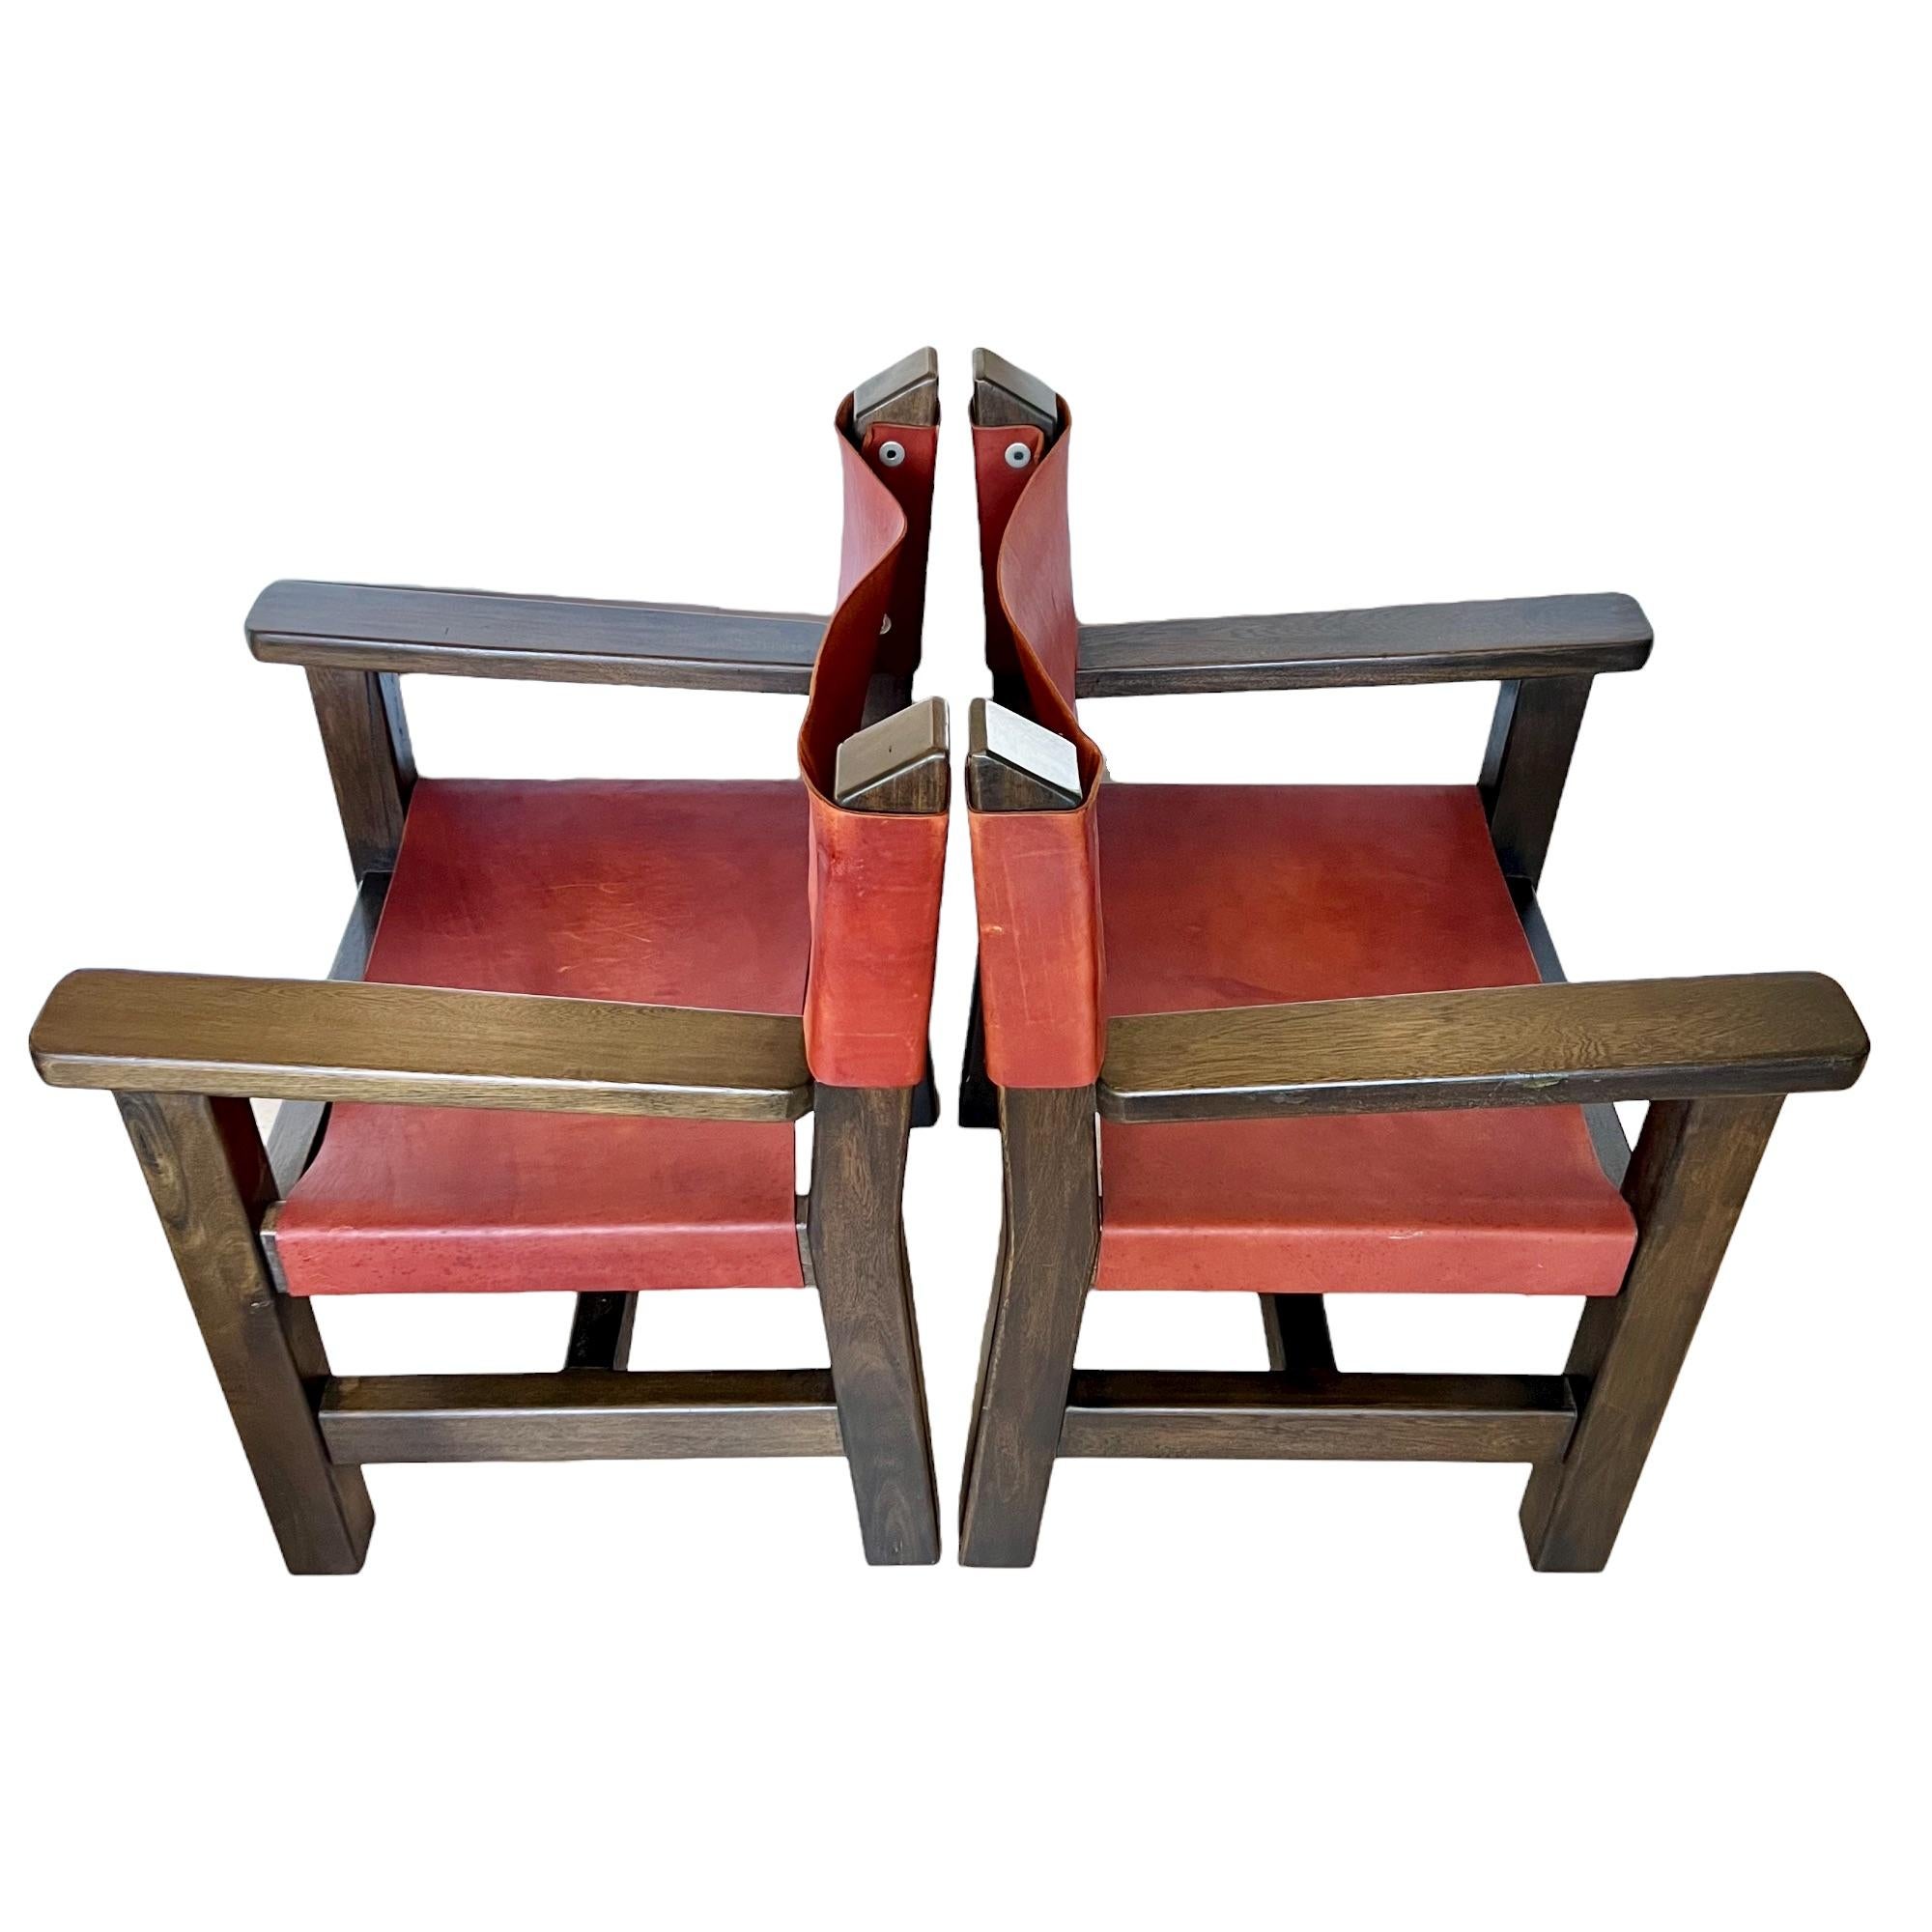 Late 20th Century Spanish Brutalist Wood & Leather Armchairs, a Pair For Sale 2